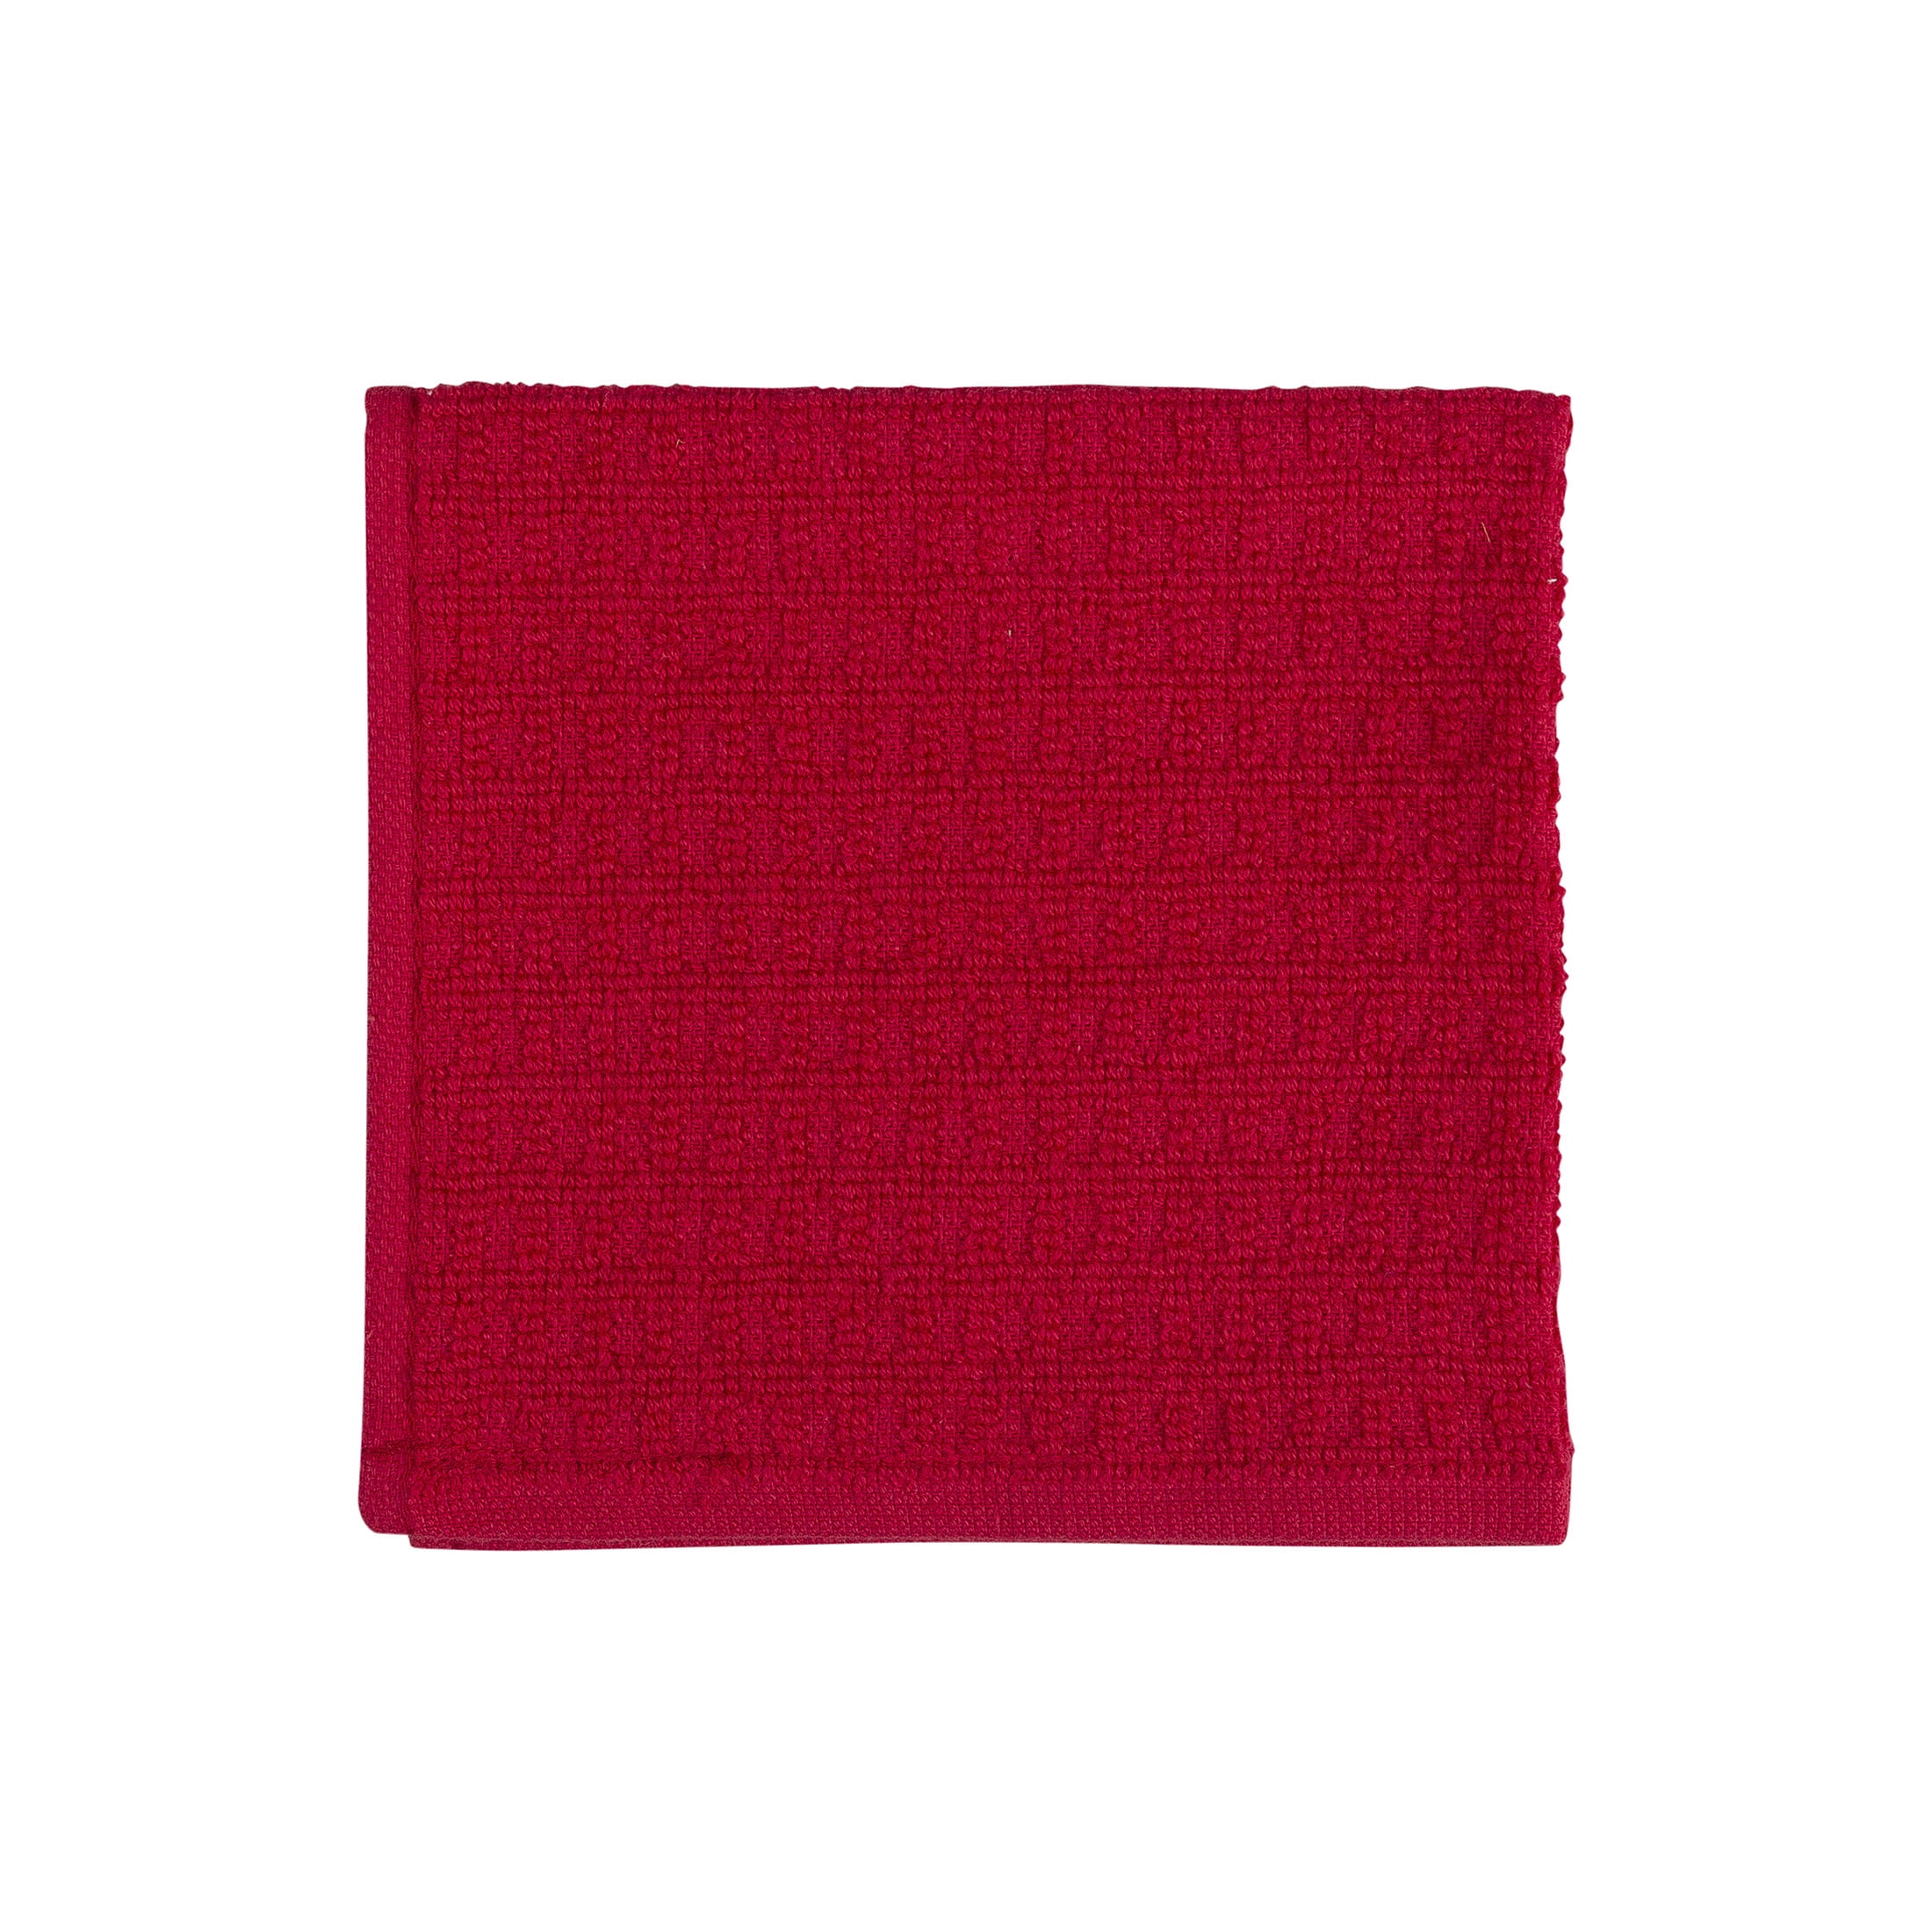 Home Basics Colored Dish Cloth - 12 x 12 (2-Pack) by R&R Textile Mills,  Inc.